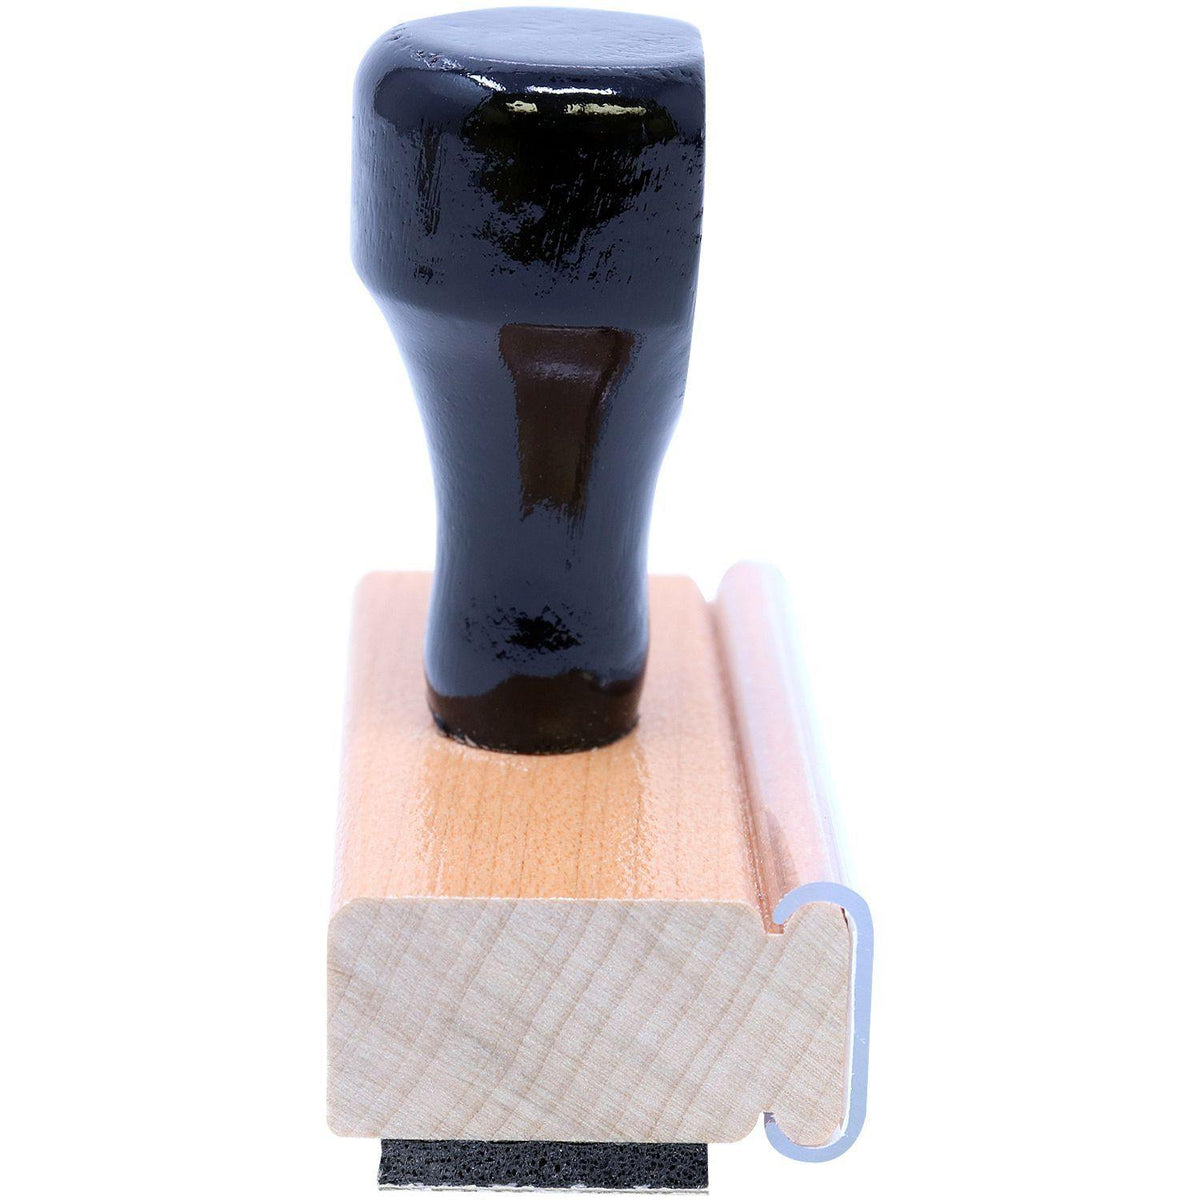 Large Special Services Rubber Stamp - Engineer Seal Stamps - Brand_Acorn, Impression Size_Large, Stamp Type_Regular Stamp, Type of Use_Postal &amp; Mailing, Type of Use_Shipping &amp; Receiving